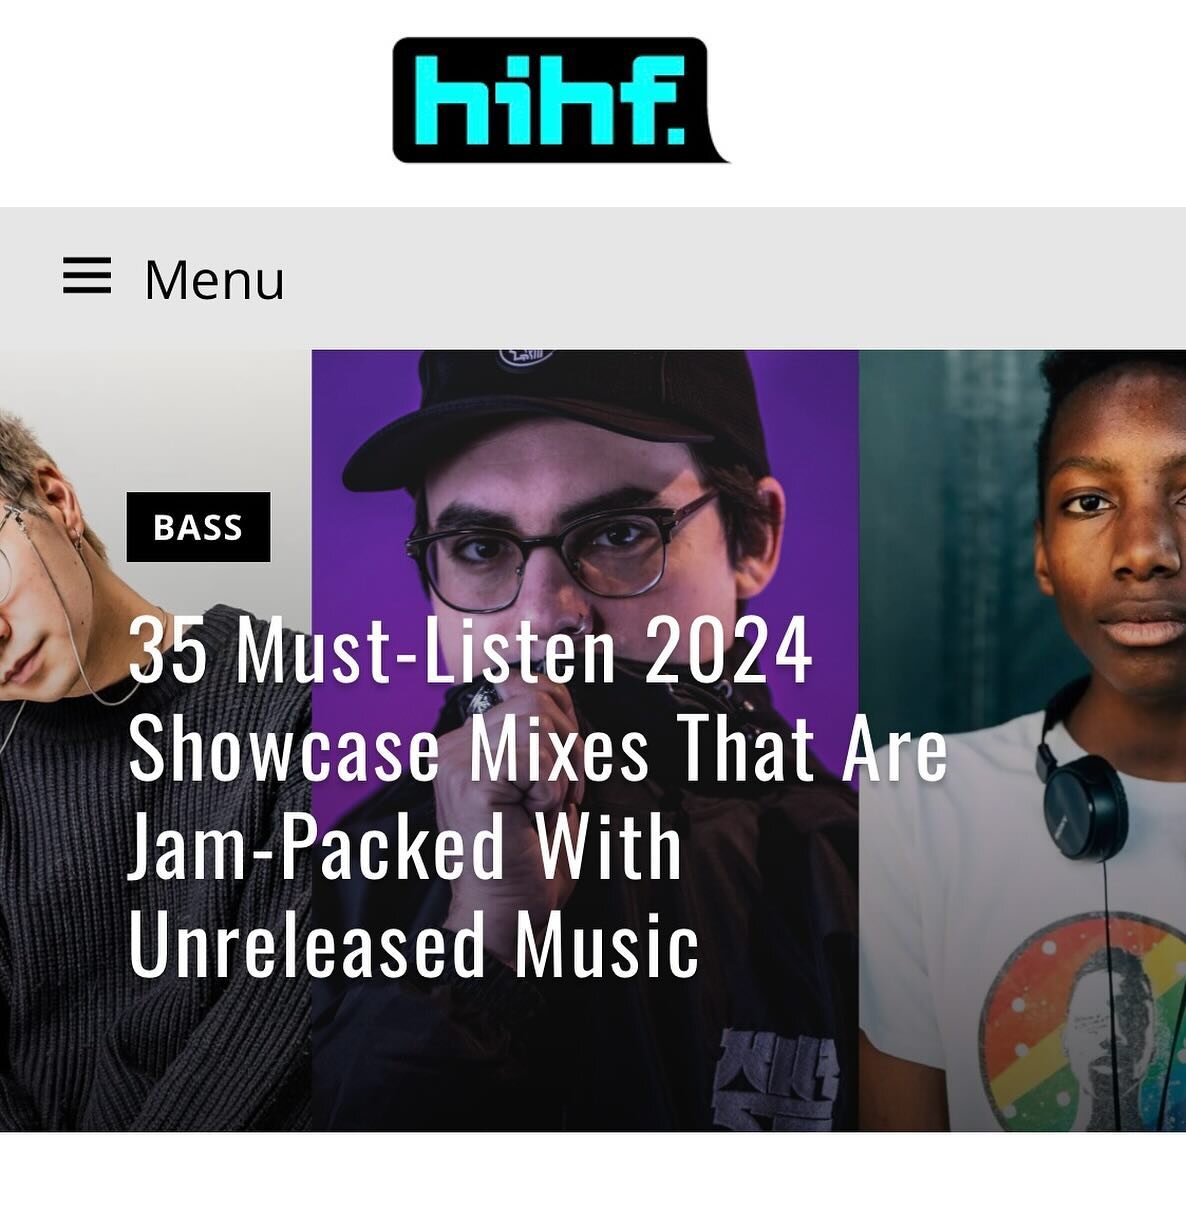 huge thank you to @hearditherefirstmusic for including my 2024 Showcase Mix in their Must Listen series❤️

super excited about the amount of music to come this year and the Showcase mix really feels like the crown jewel for me

another shoutout to @l